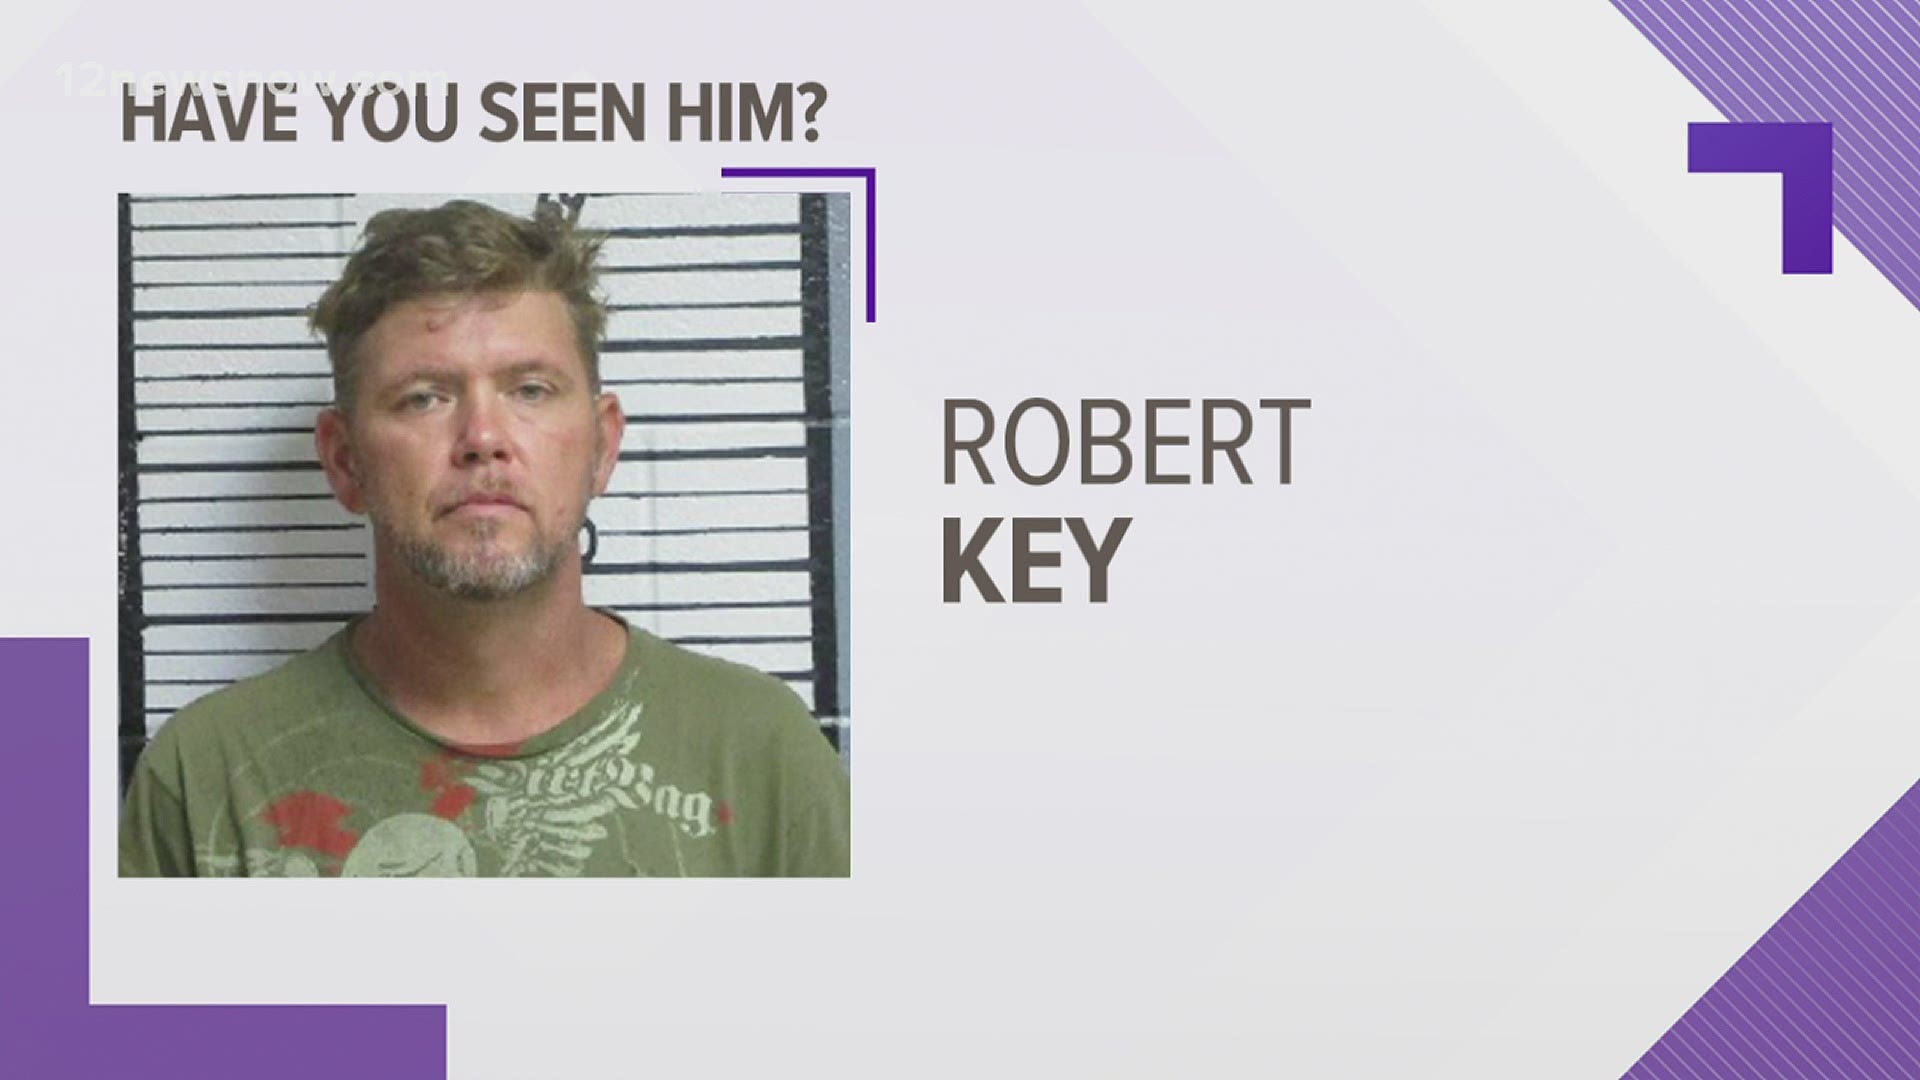 Robert Key's jumpsuit was found in a wooded area according to law enforcement